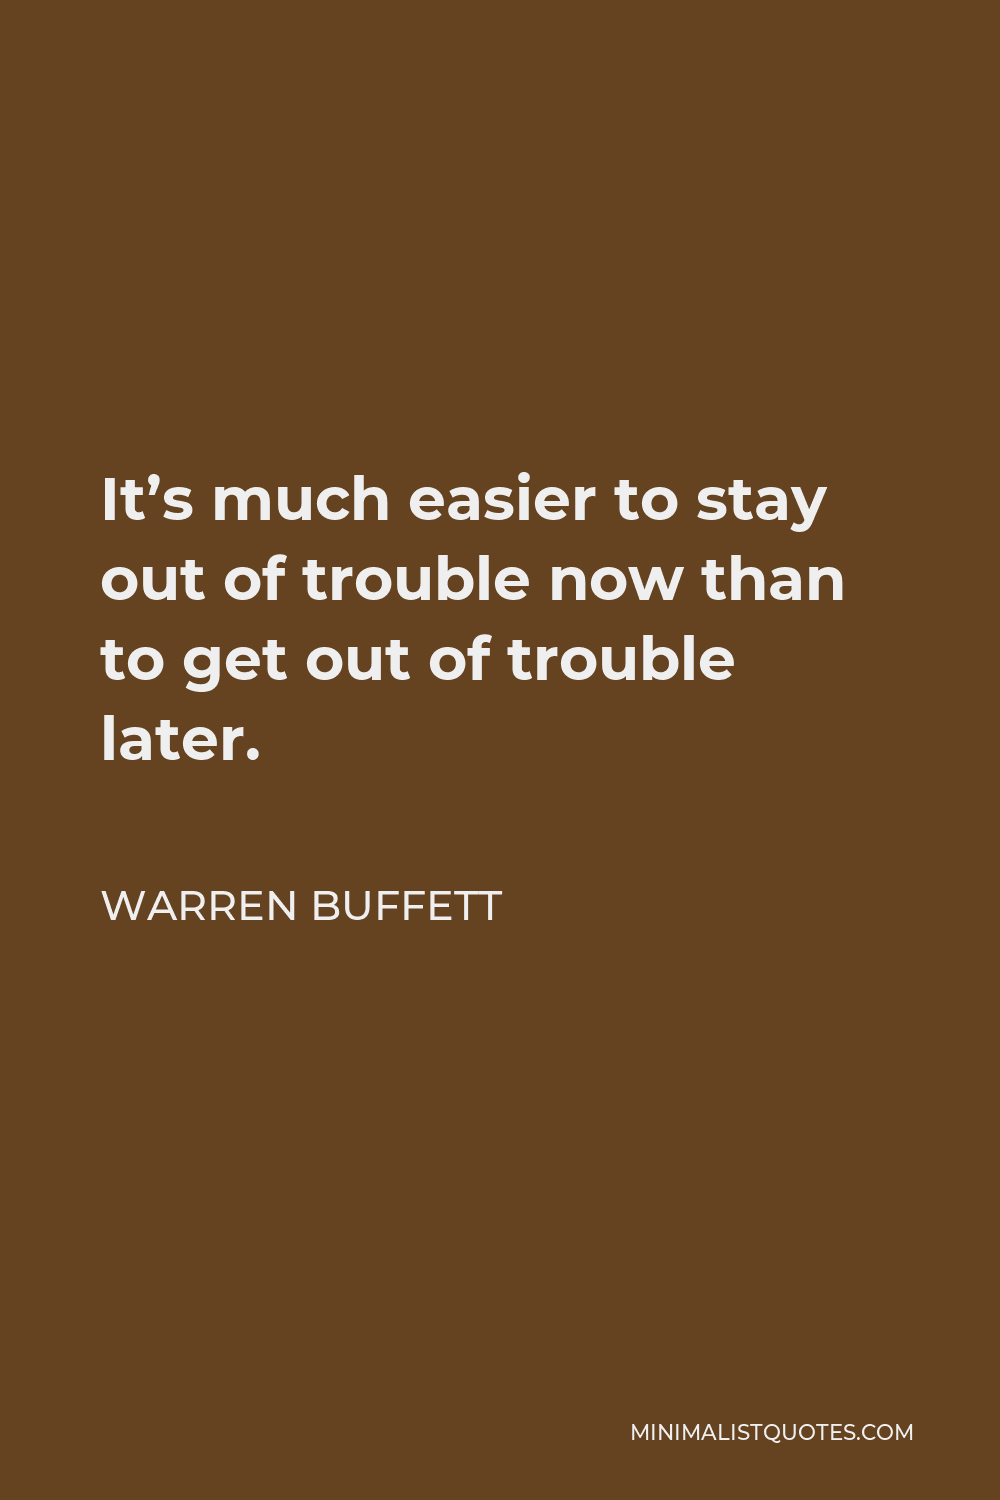 Warren Buffett Quote - It’s much easier to stay out of trouble now than to get out of trouble later.